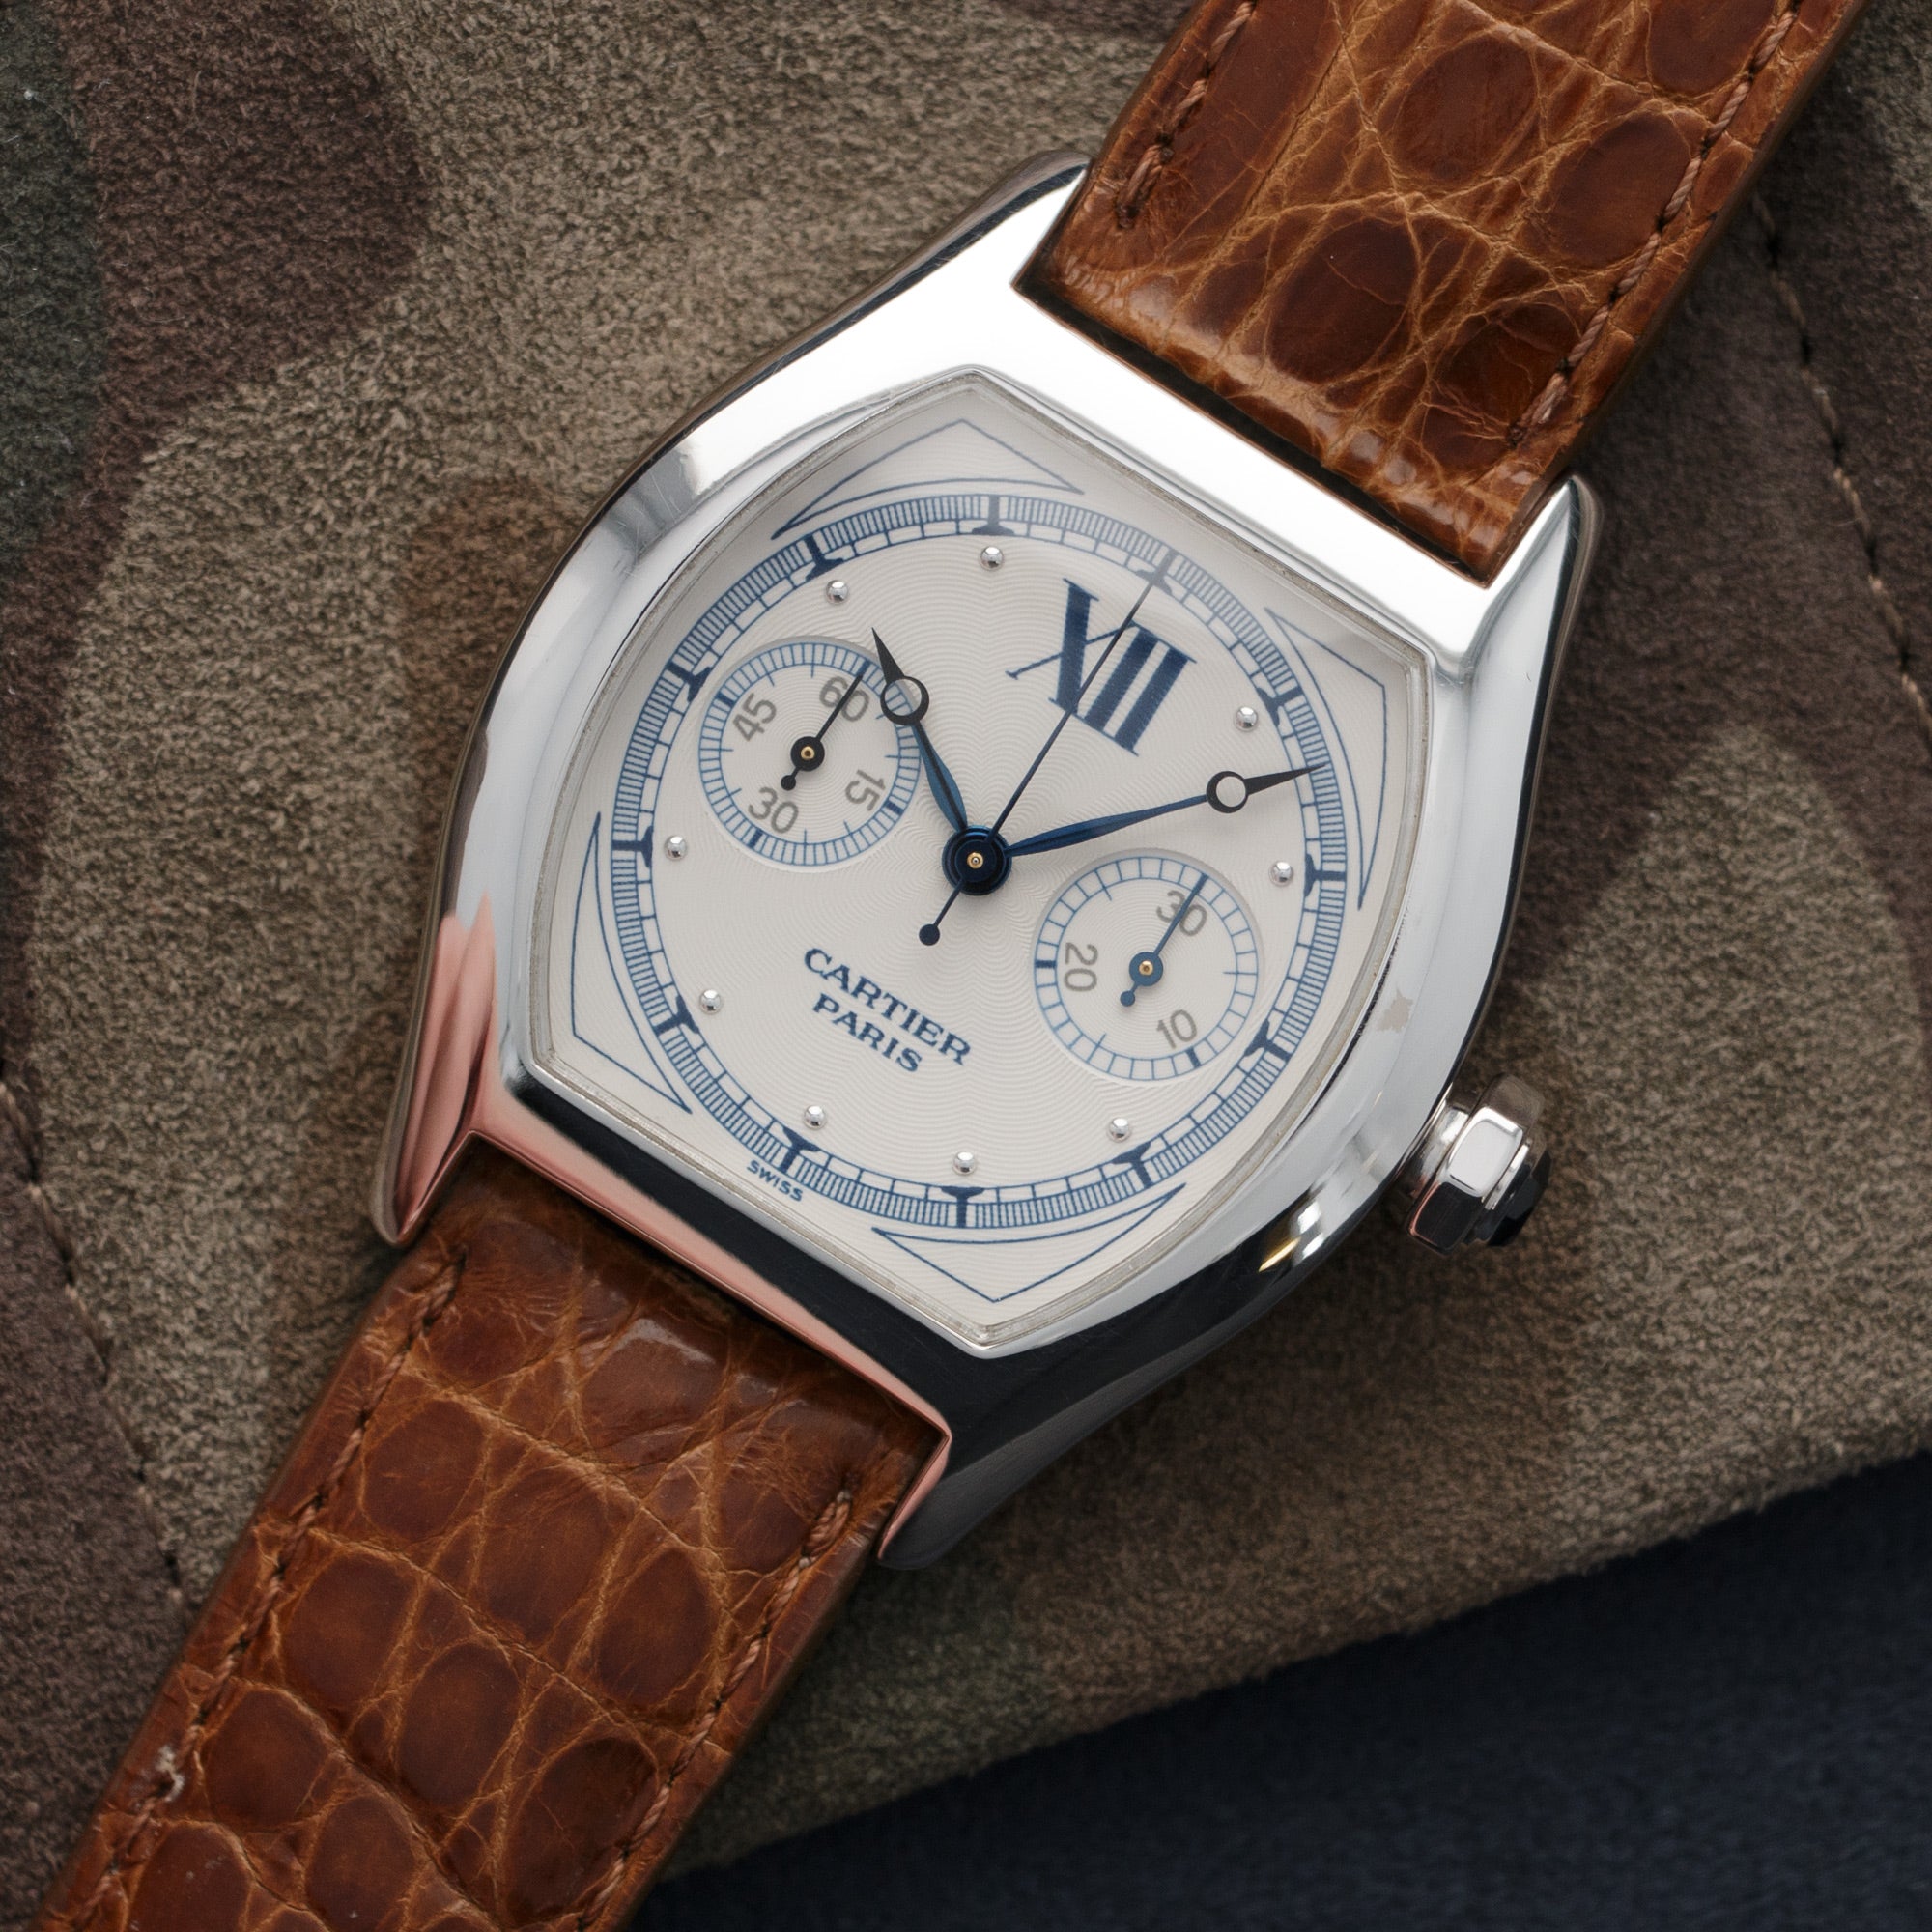 Cartier - Cartier White Gold Tortue Monopoussoir Chronograph Watch Ref. 2396 - The Keystone Watches